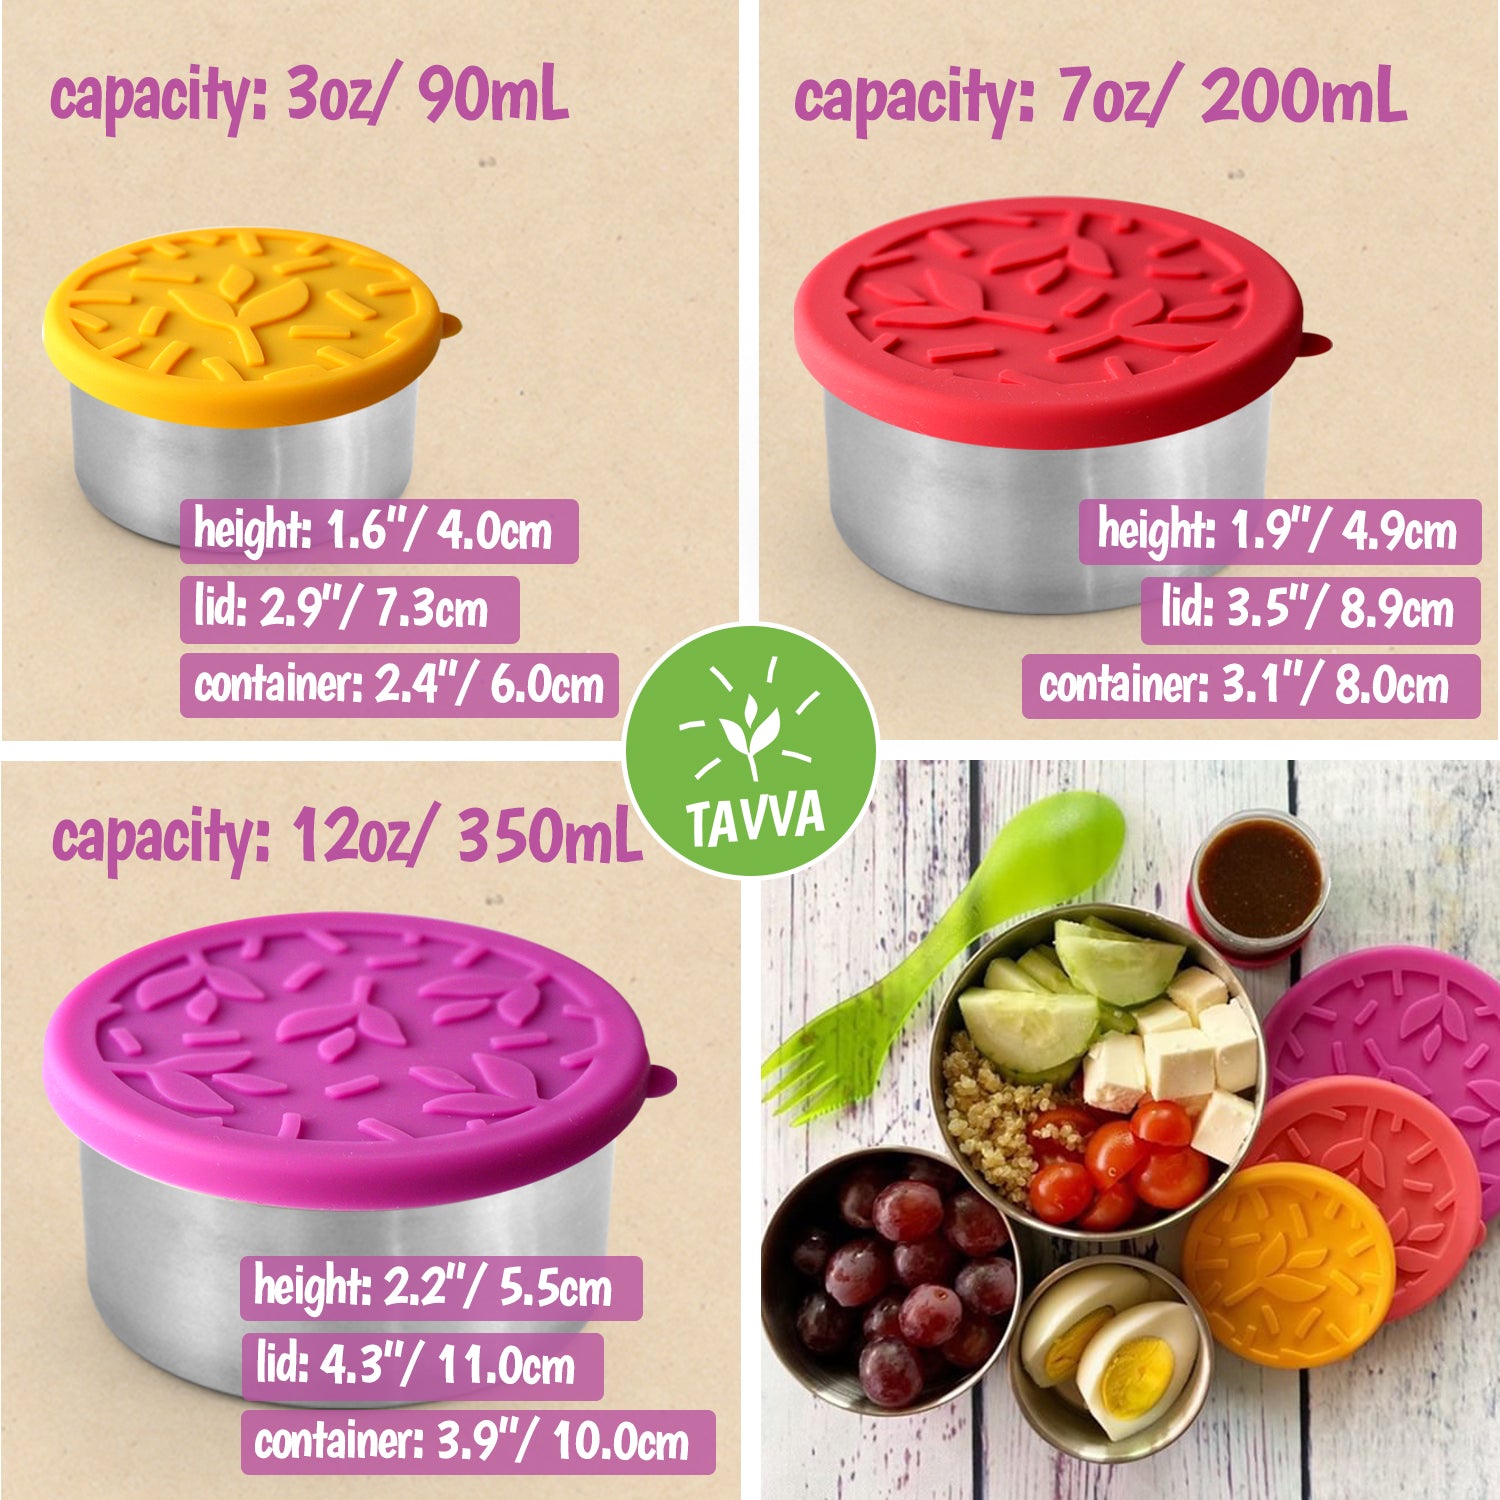 Tanjiae Stainless Steel Snack Containers for Kids | Easy Open Leak Proof  Small Food Containers with Silicone Lids - Perfect Metal Toddler Lunch Box